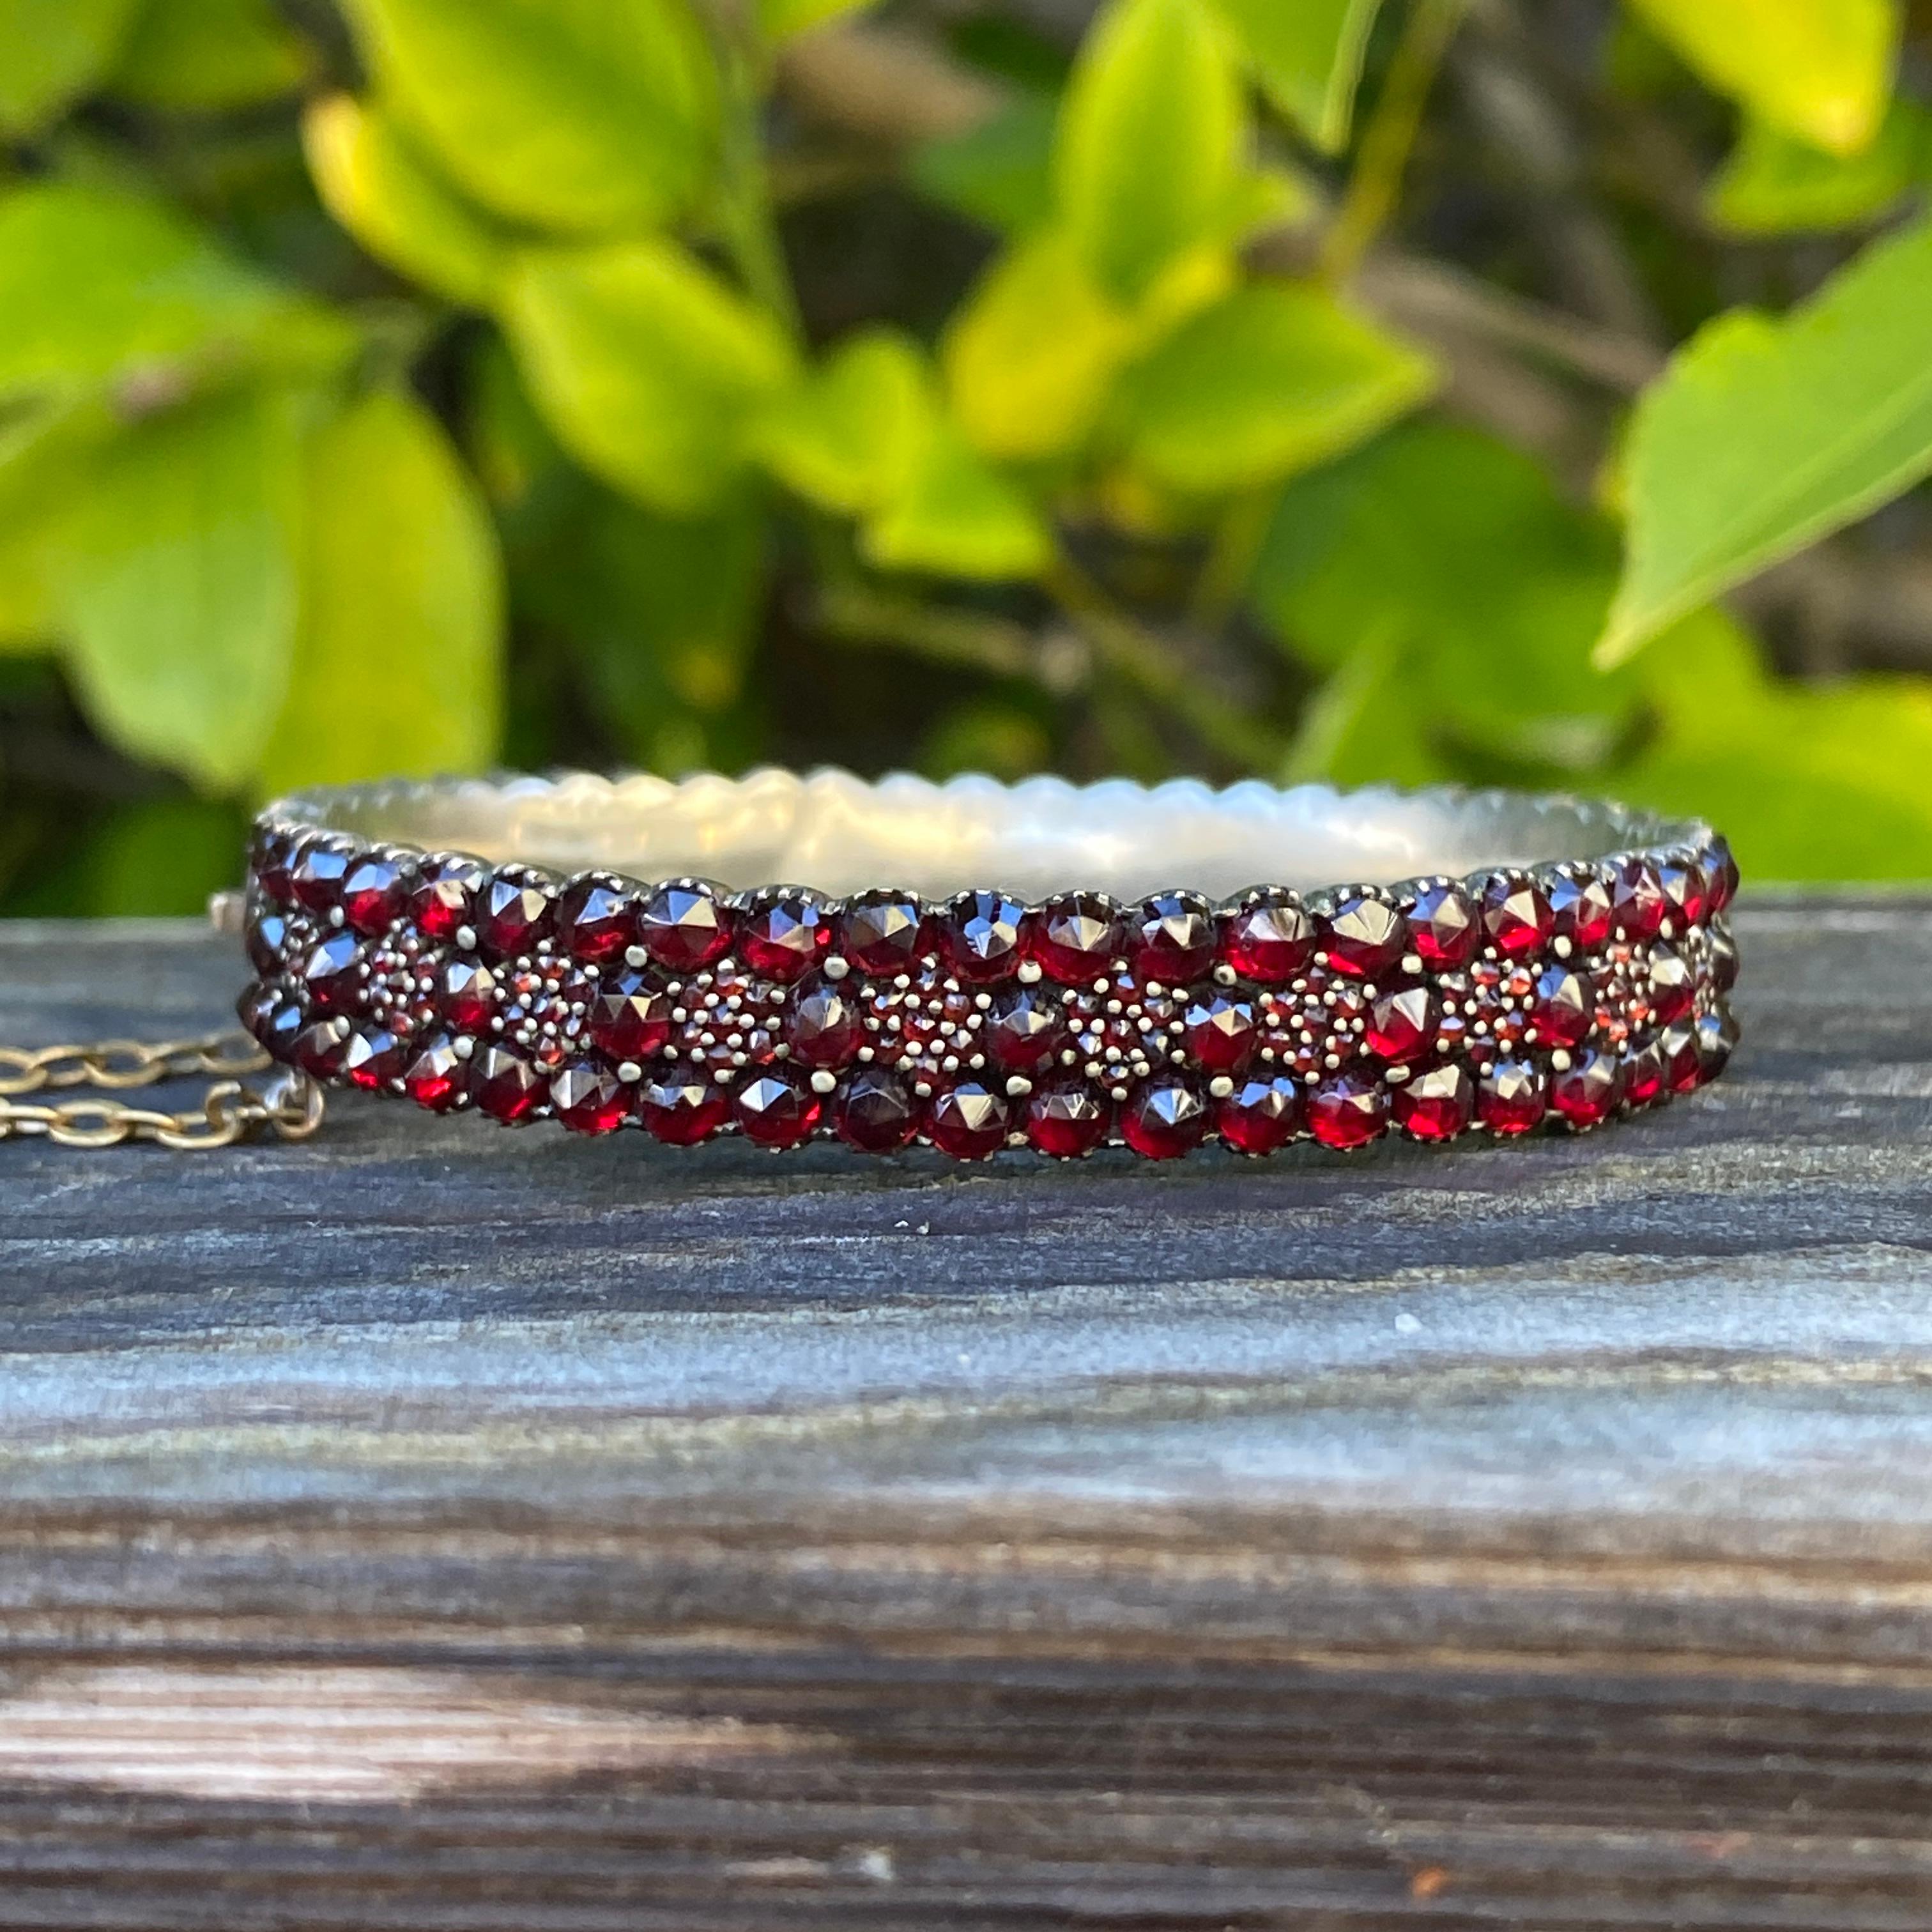 Details:
Amazing Victorian Bohemian garnet bracelet encrusted in lovely deep red garnets. Nice round sparkly bangle bracelet with a lovely red glow! Beautiful floral themed bracelet with faceted garnets, prong set in silver. It’s very pretty! This